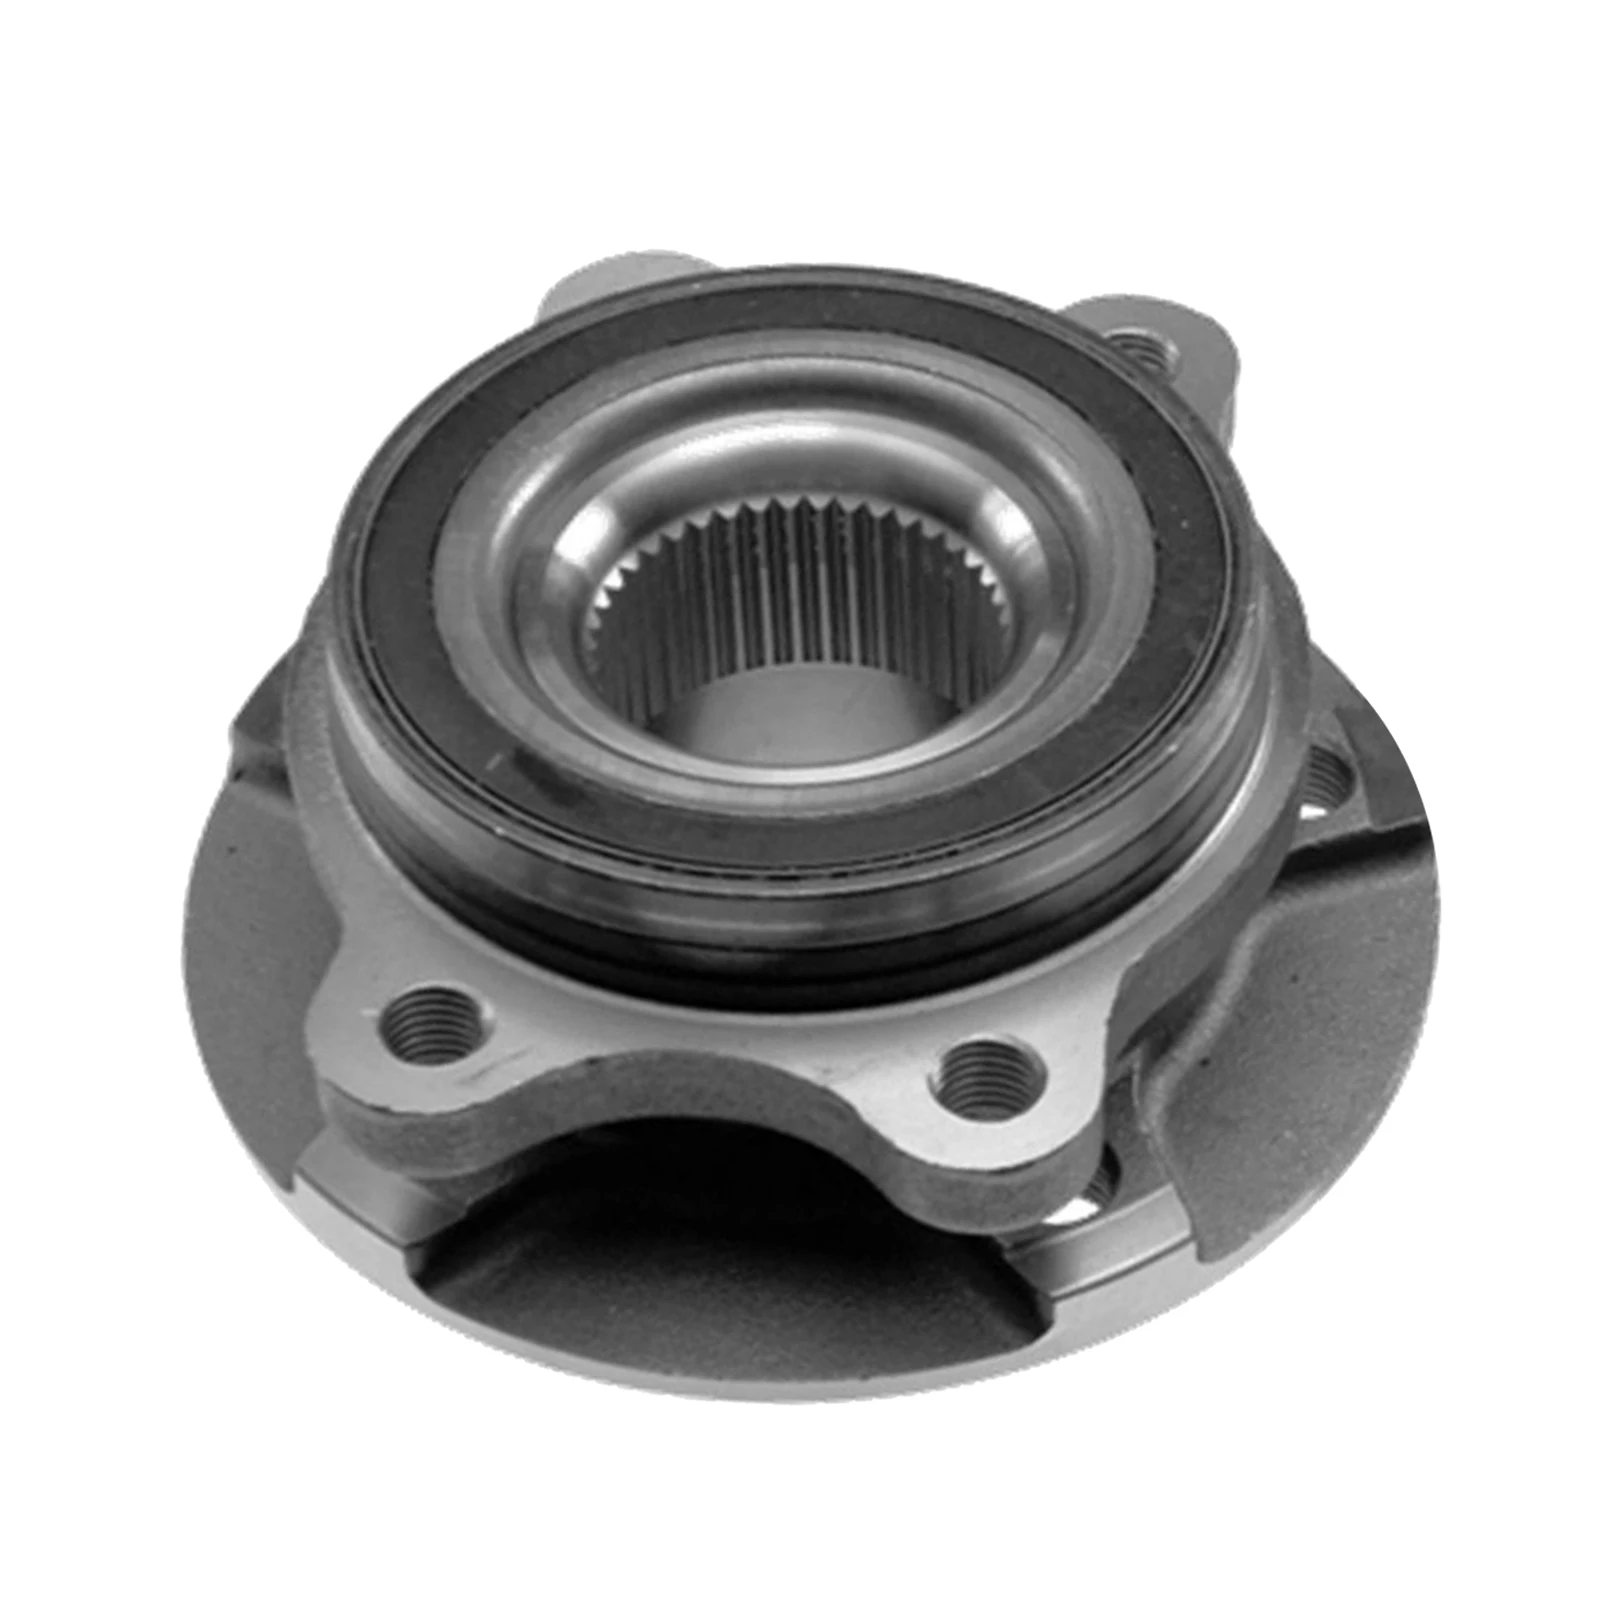 Front Wheel Bearing Hub Assembly Compatible for Audi A4, 2009-2015 A5 2010-2014, 2012-2015, Q5 2009-2015 S4 2008-2015